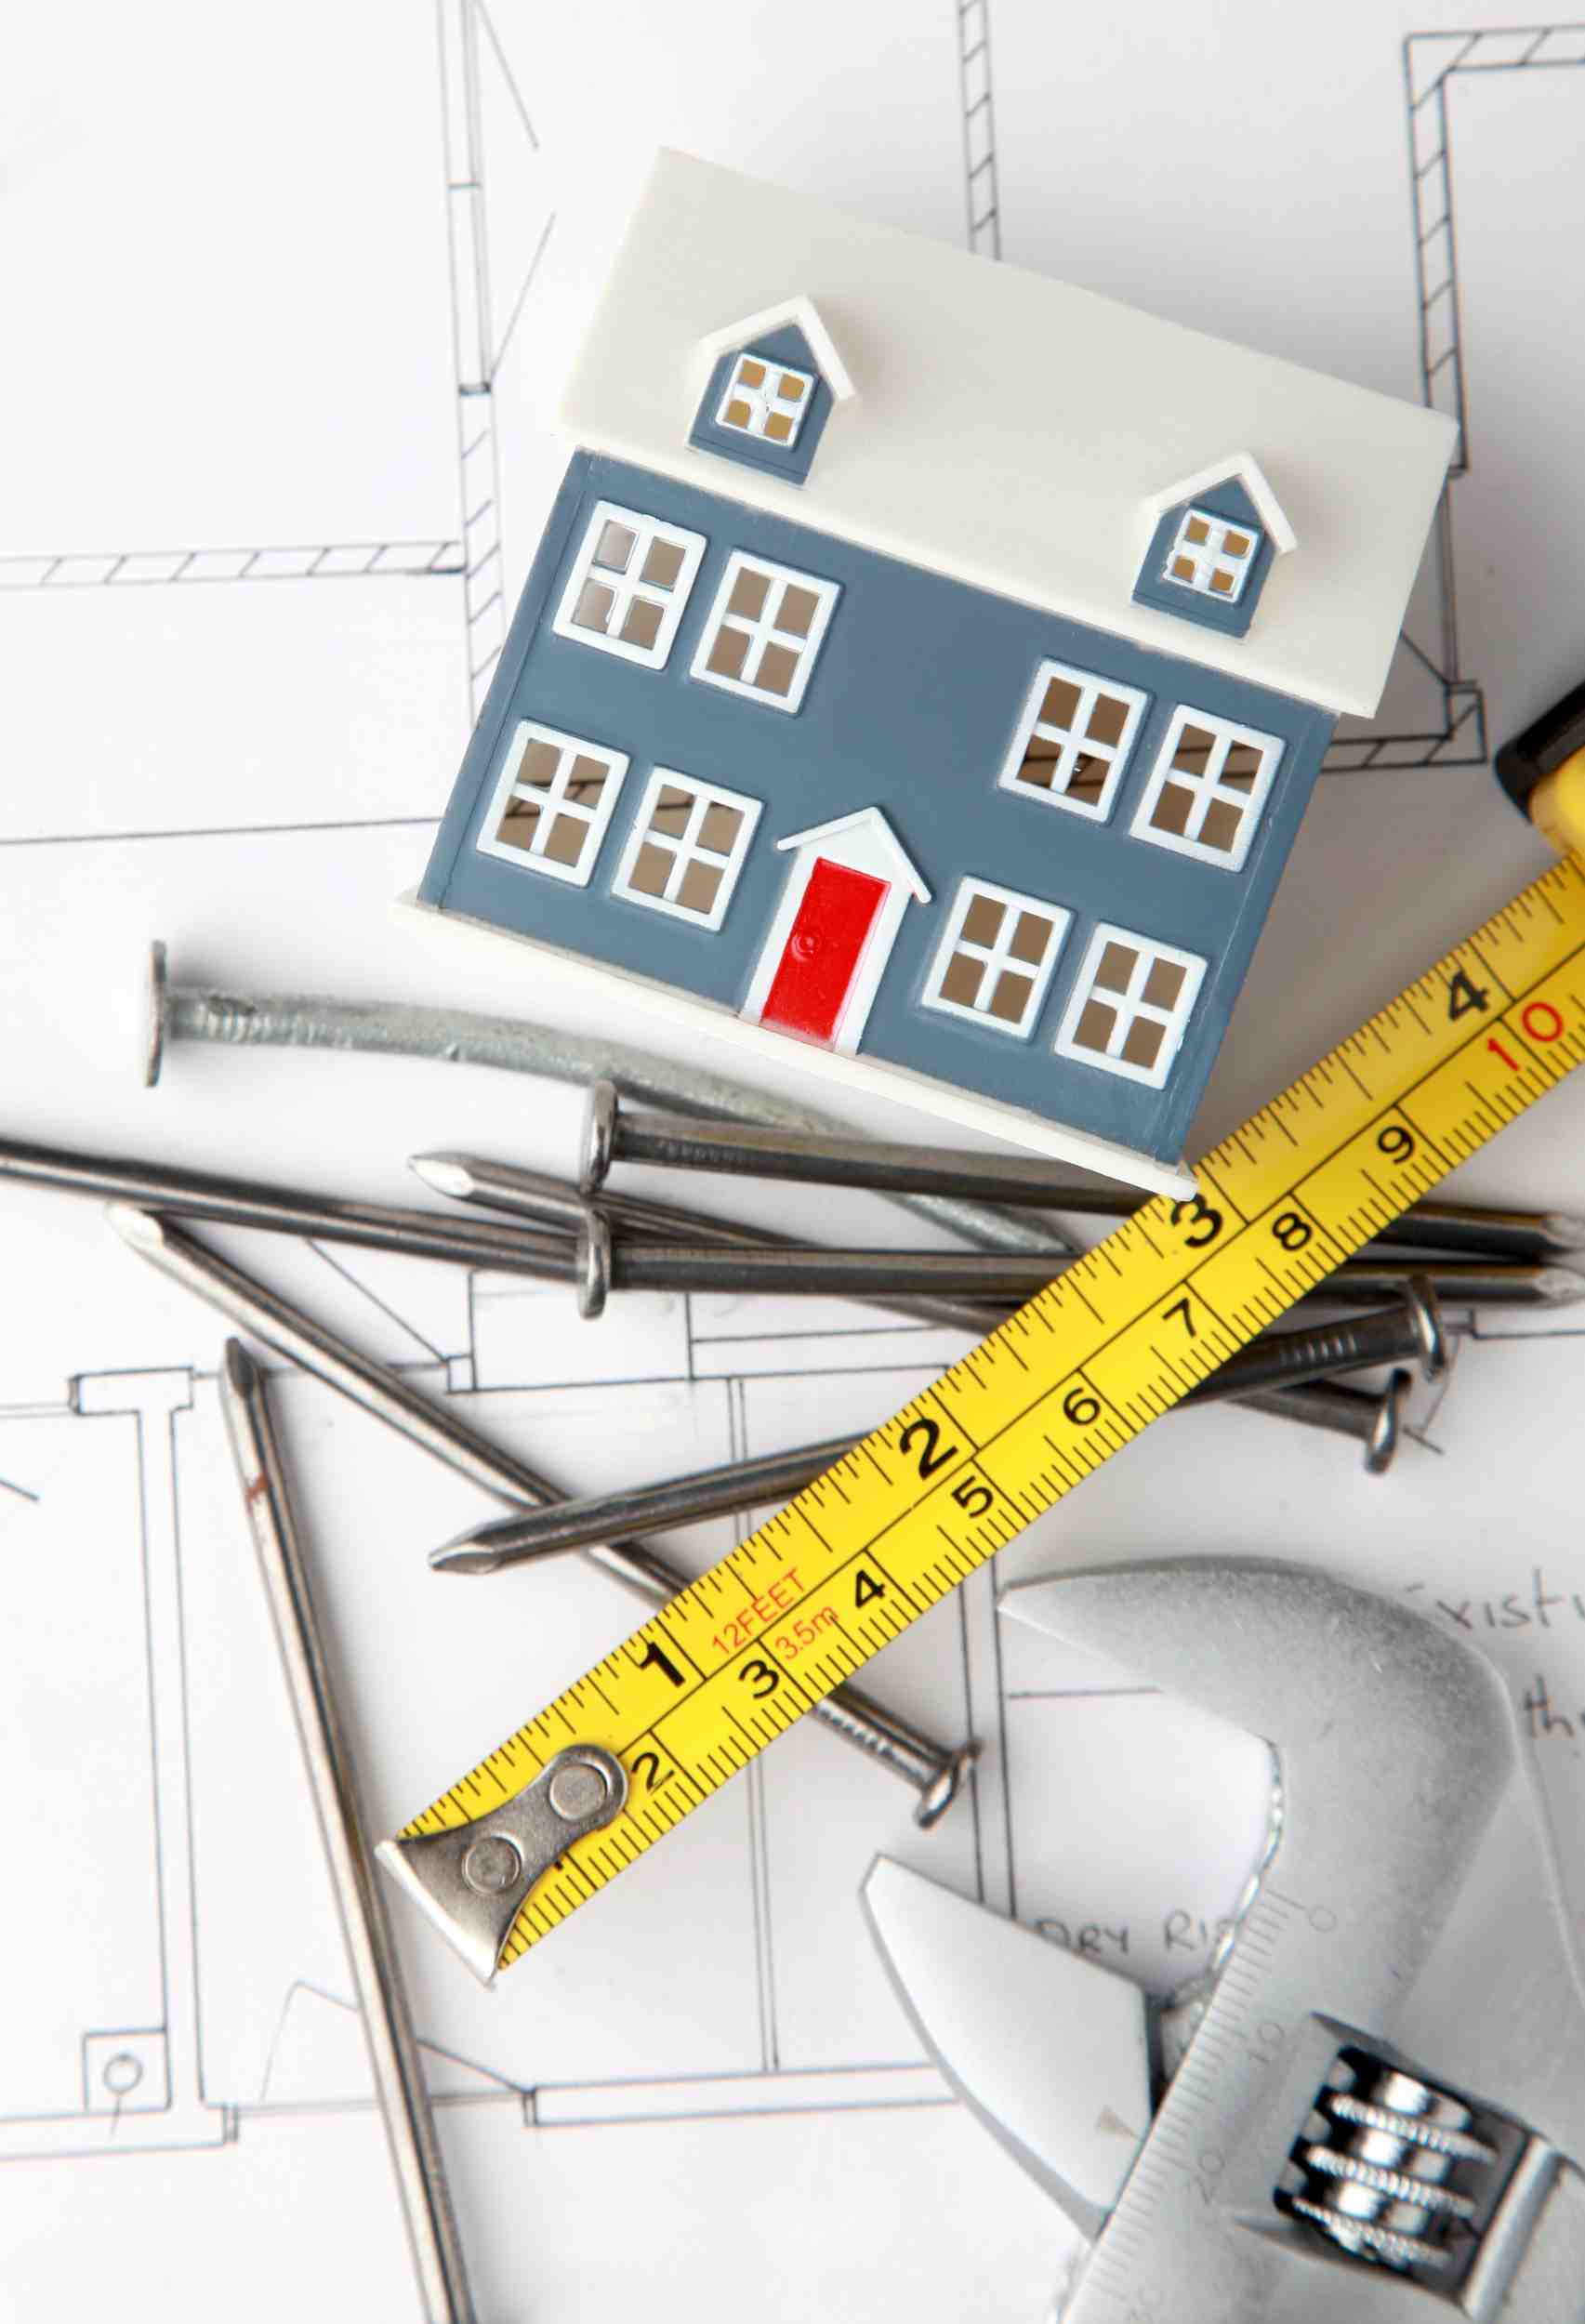 Home renovations made easier: 7 aspects to include for comfort